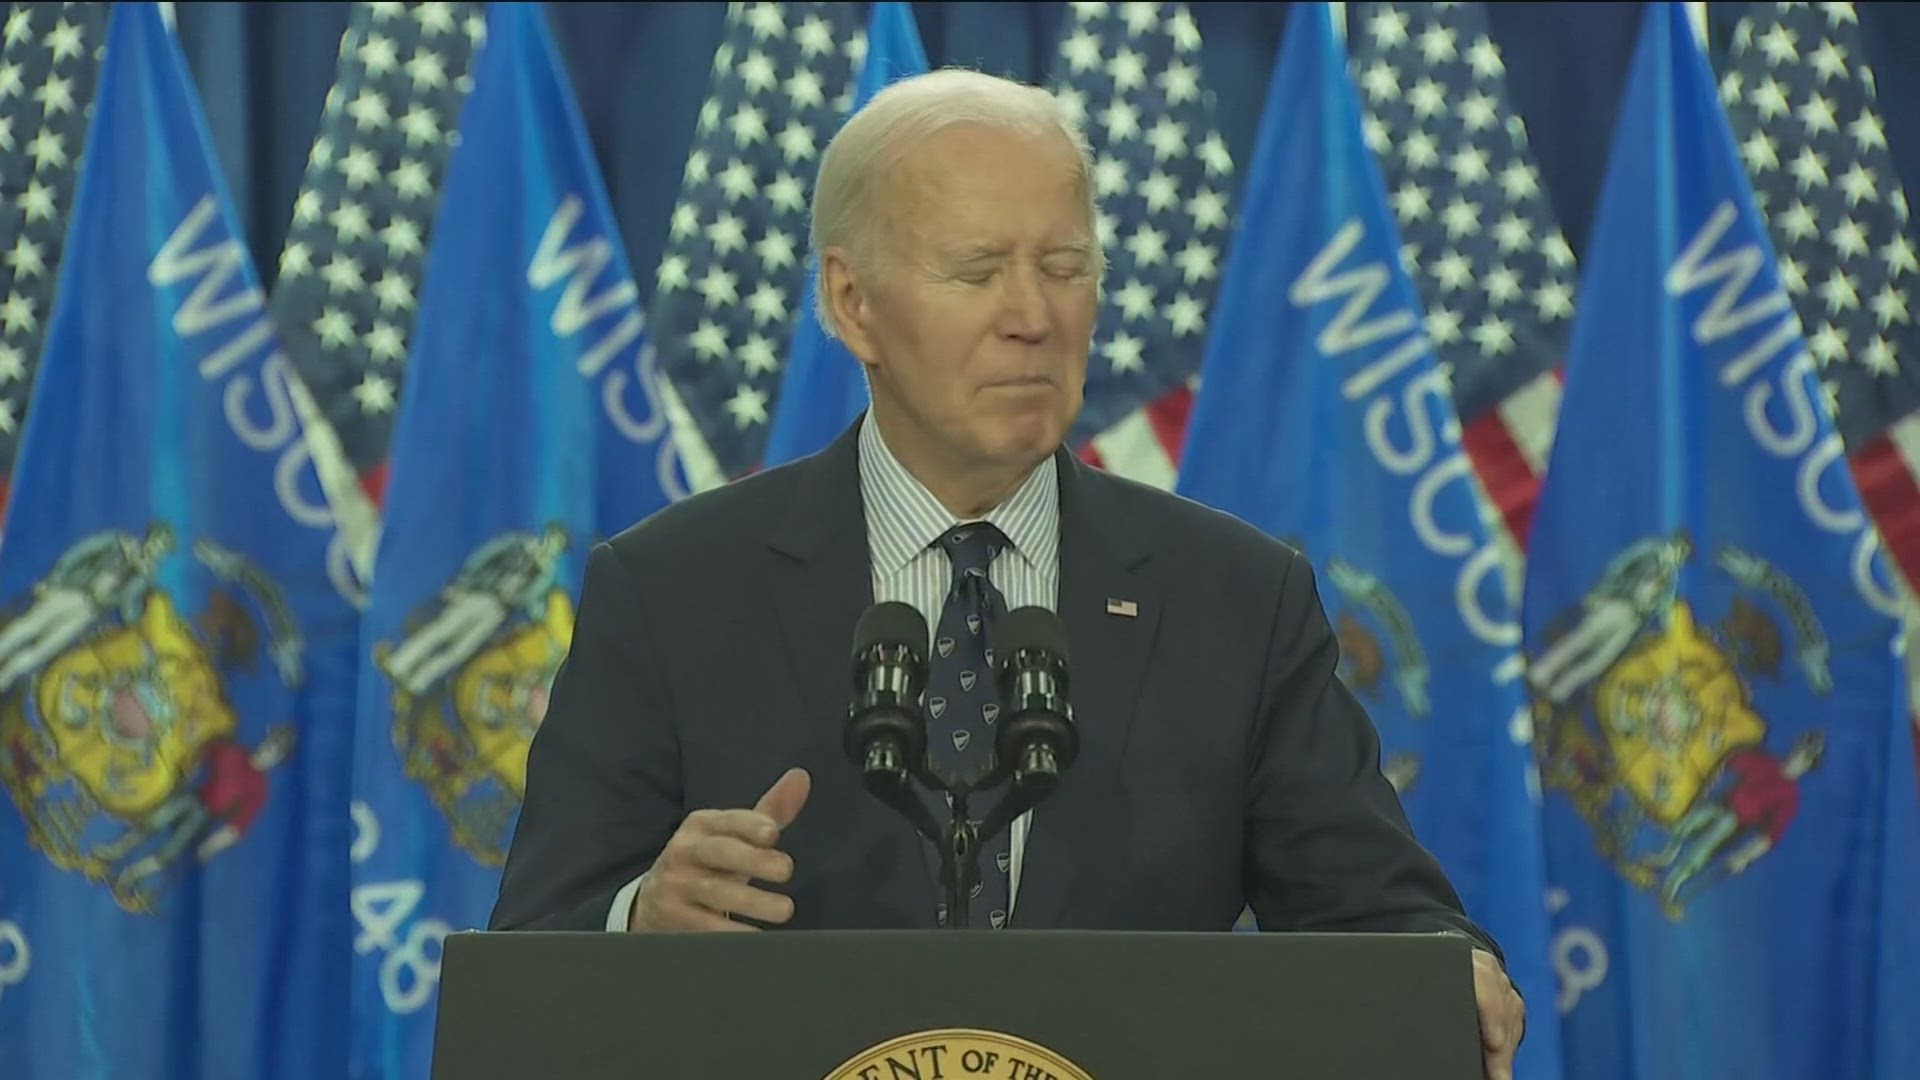 Biden said he wanted to “give everybody a fair shot” and the “freedom to chase their dreams” as he lamented the rising cost of higher education.